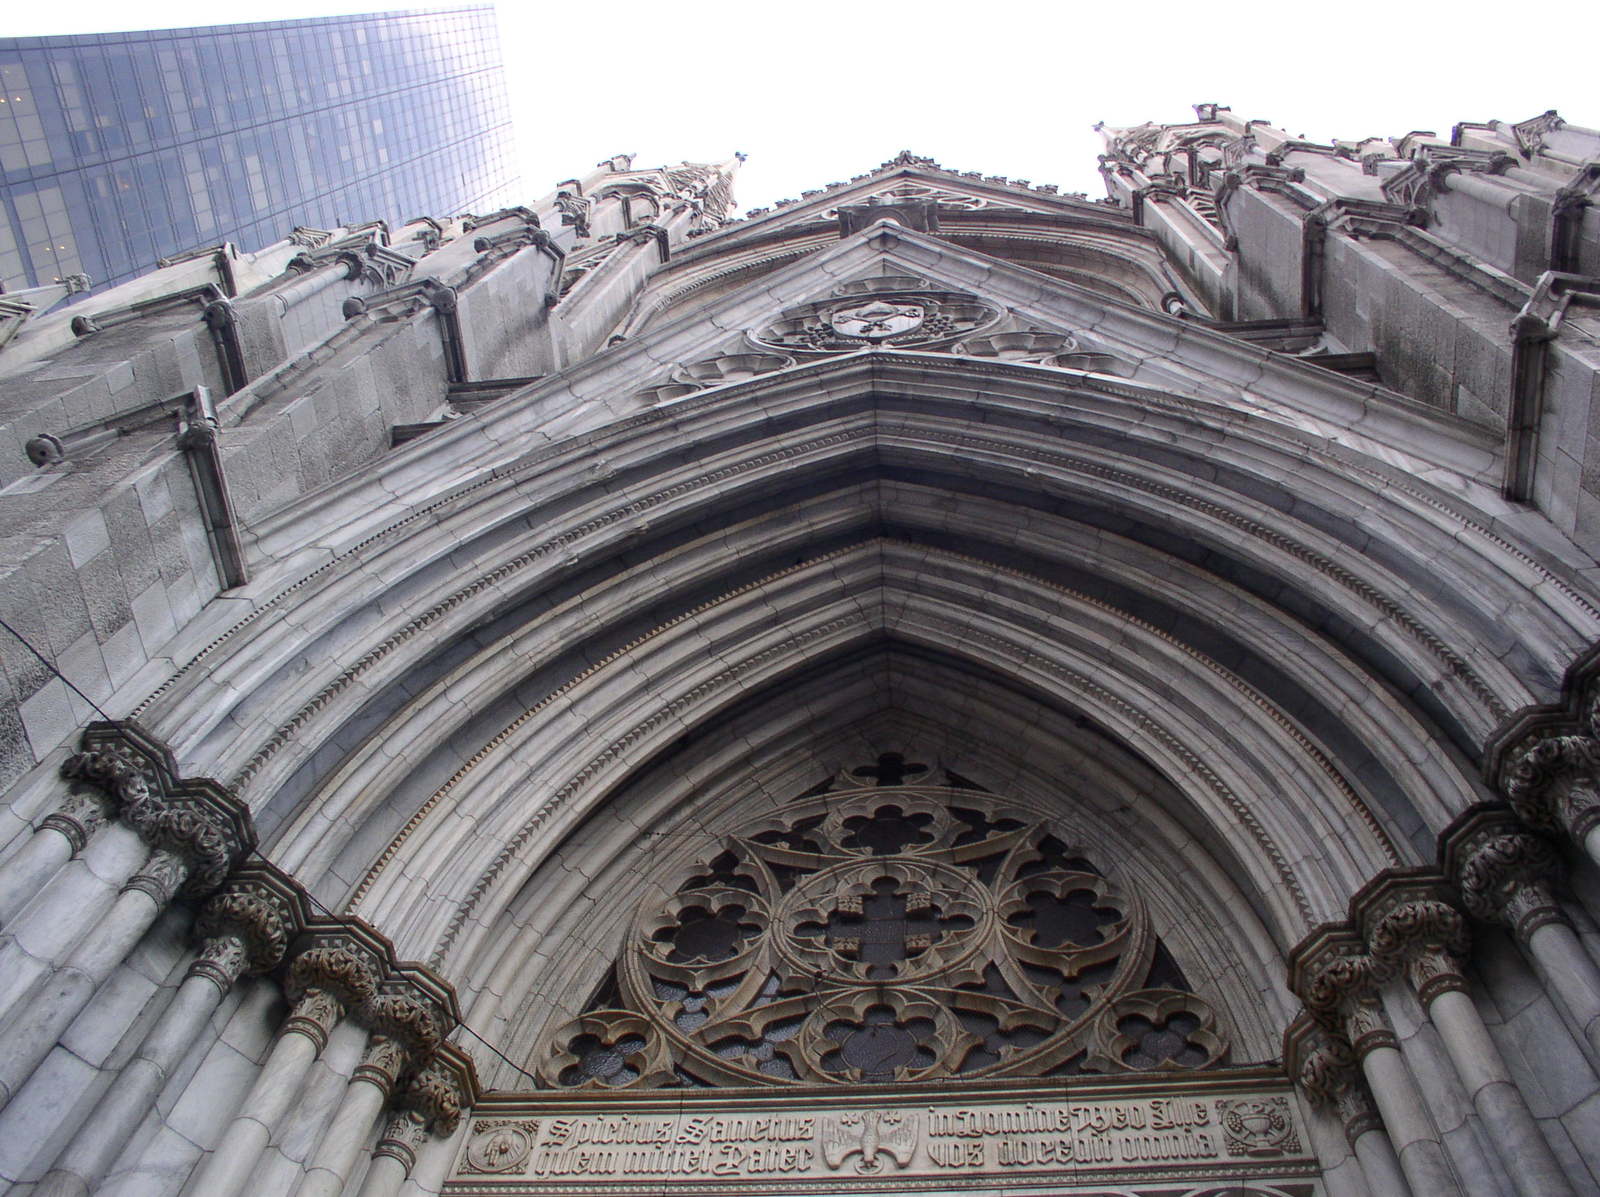 the intricate gothic architecture on this church is one example of gothic architecture